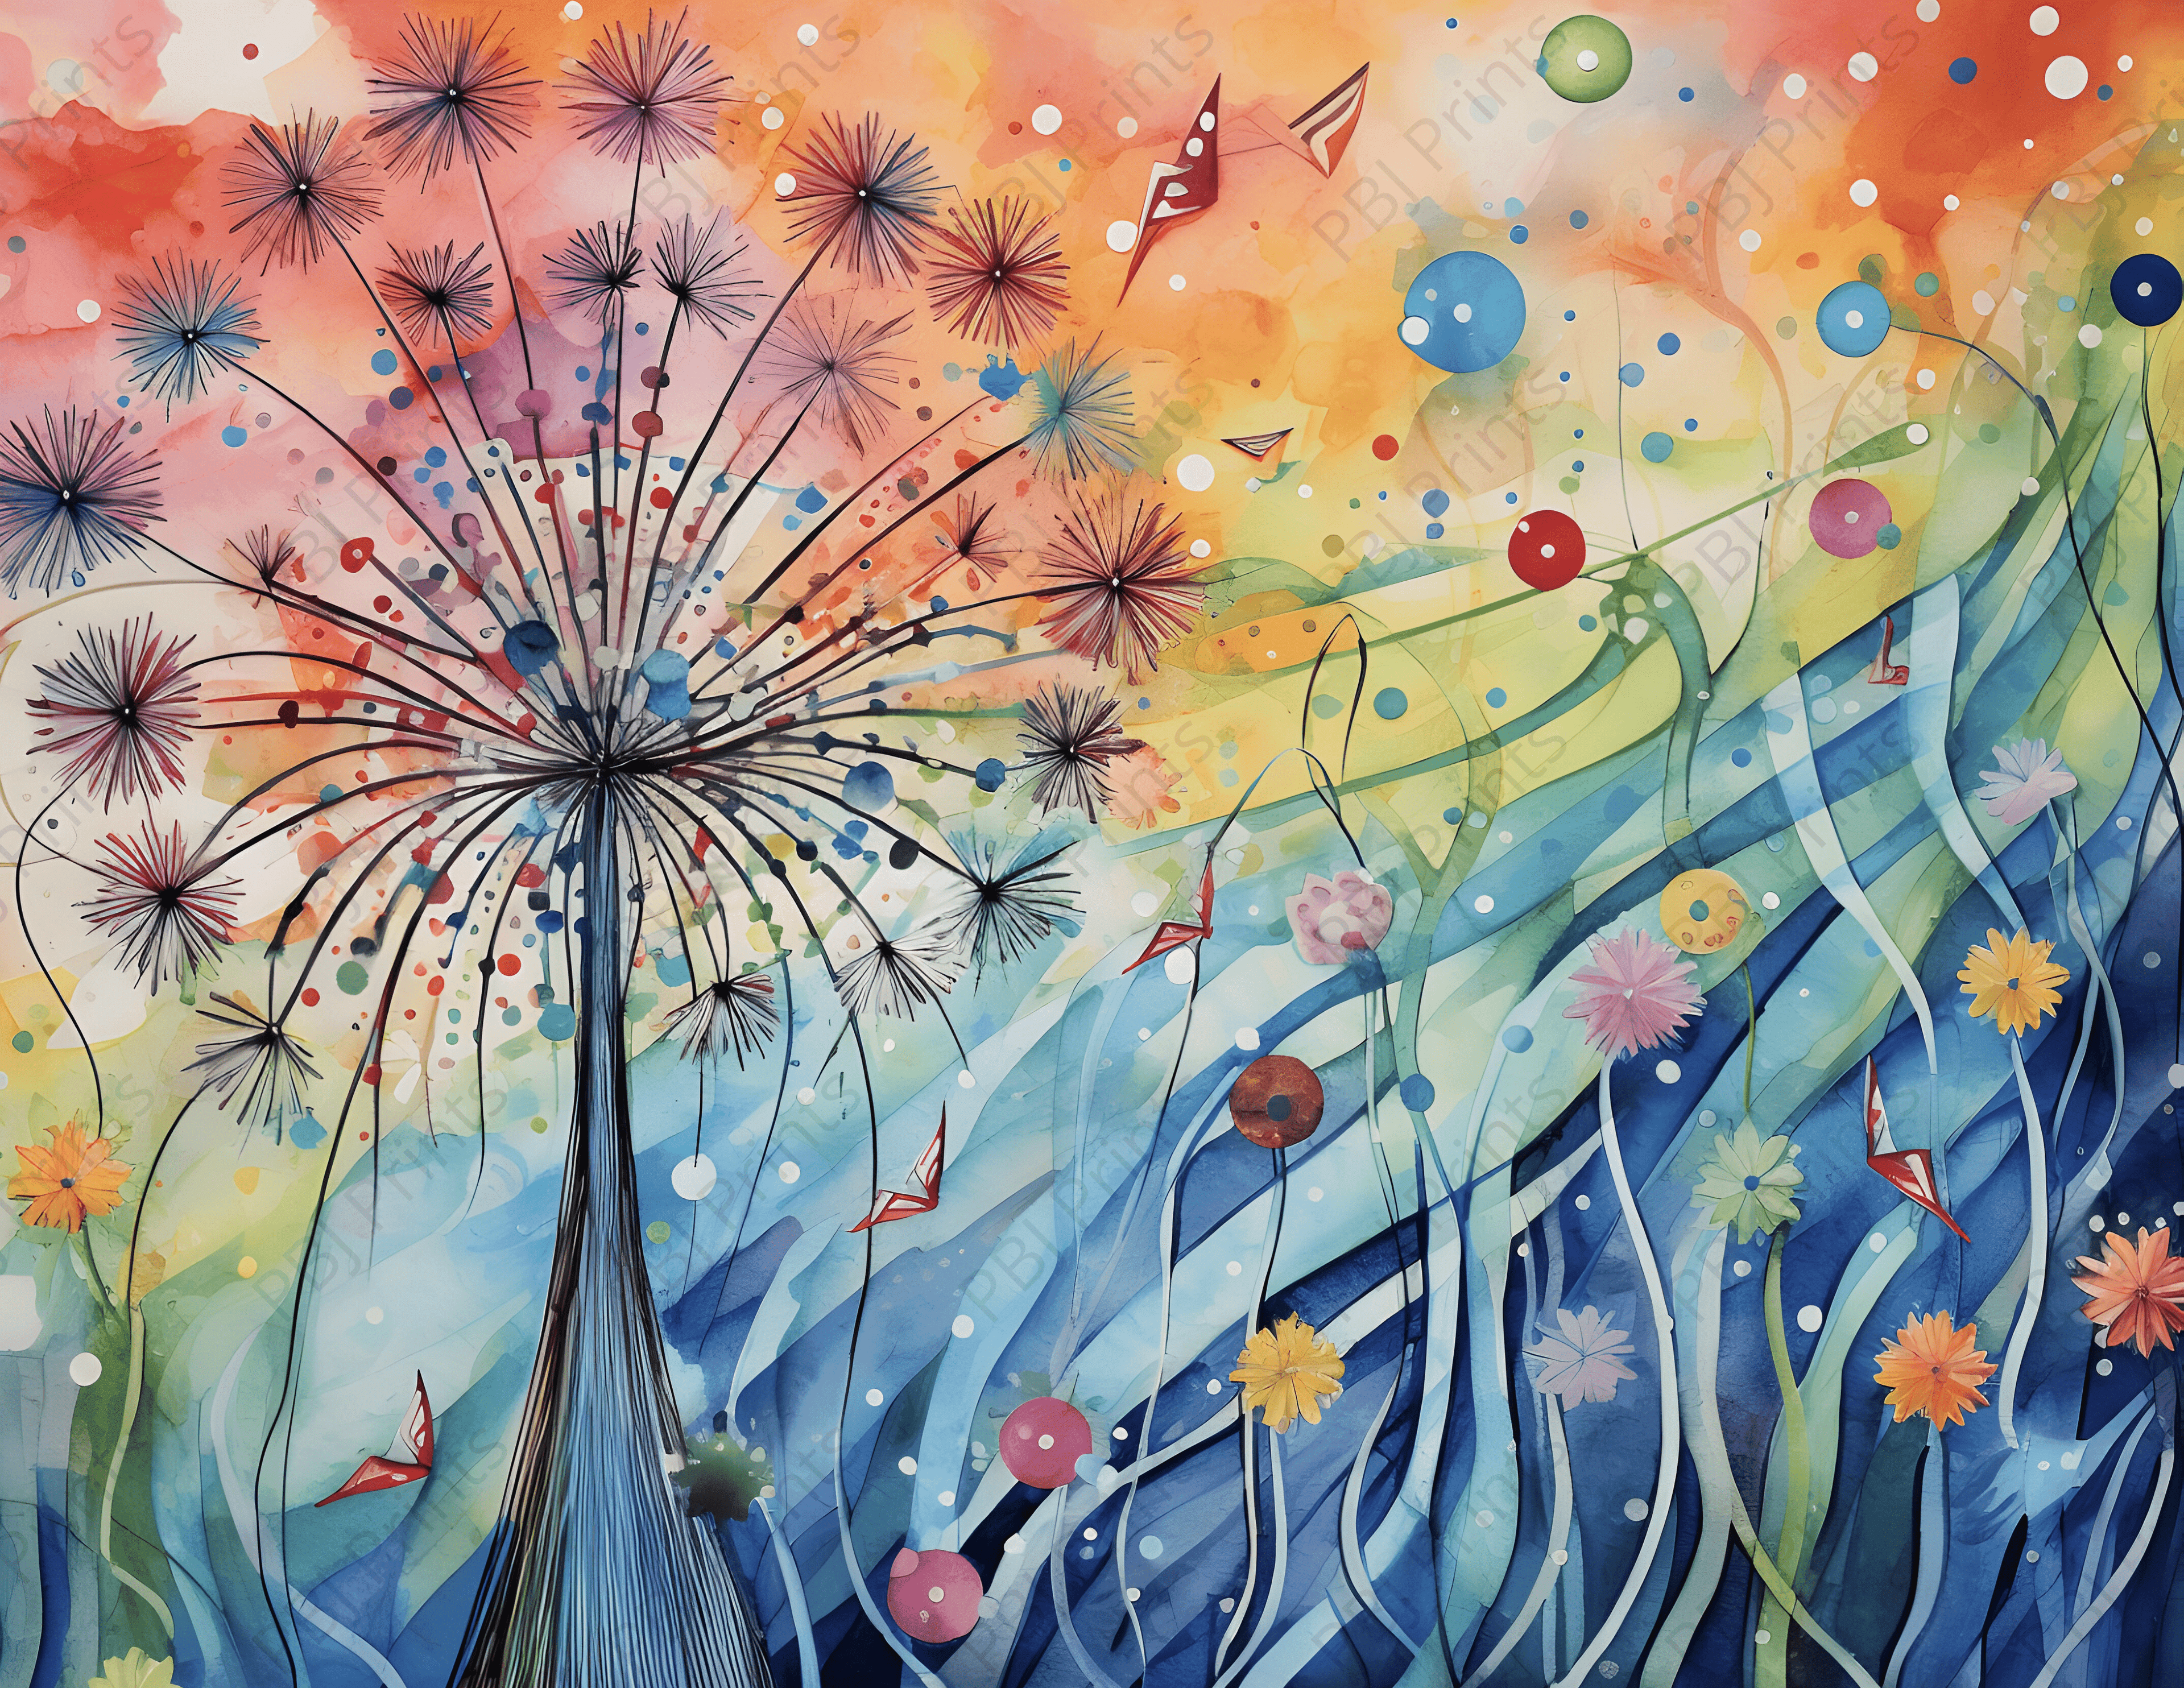 Dandelion Celebration the 4th - Artist by 2chattychicks teaching eclectic creations - Art Prints, Decoupage Rice Paper, Flat Canvas Prints, Giclee Prints, Photo Prints, Poster Prints